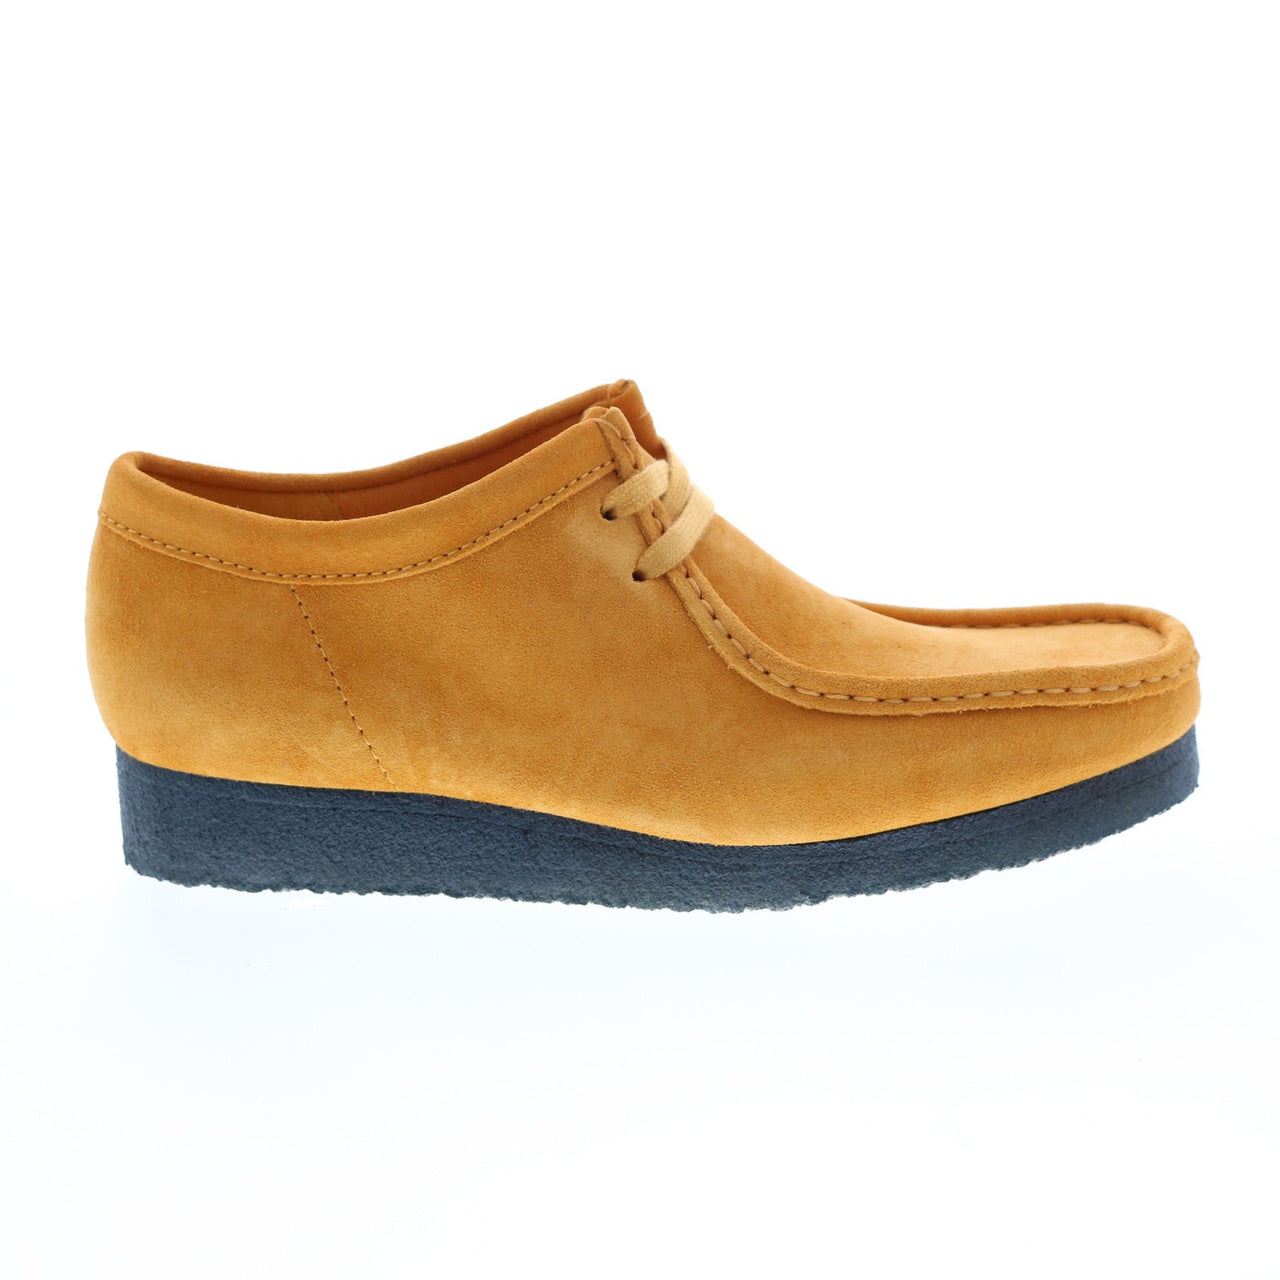 Clarks Wallabee 26168858 Mens Yellow Suede Lace Up Chukkas Boots